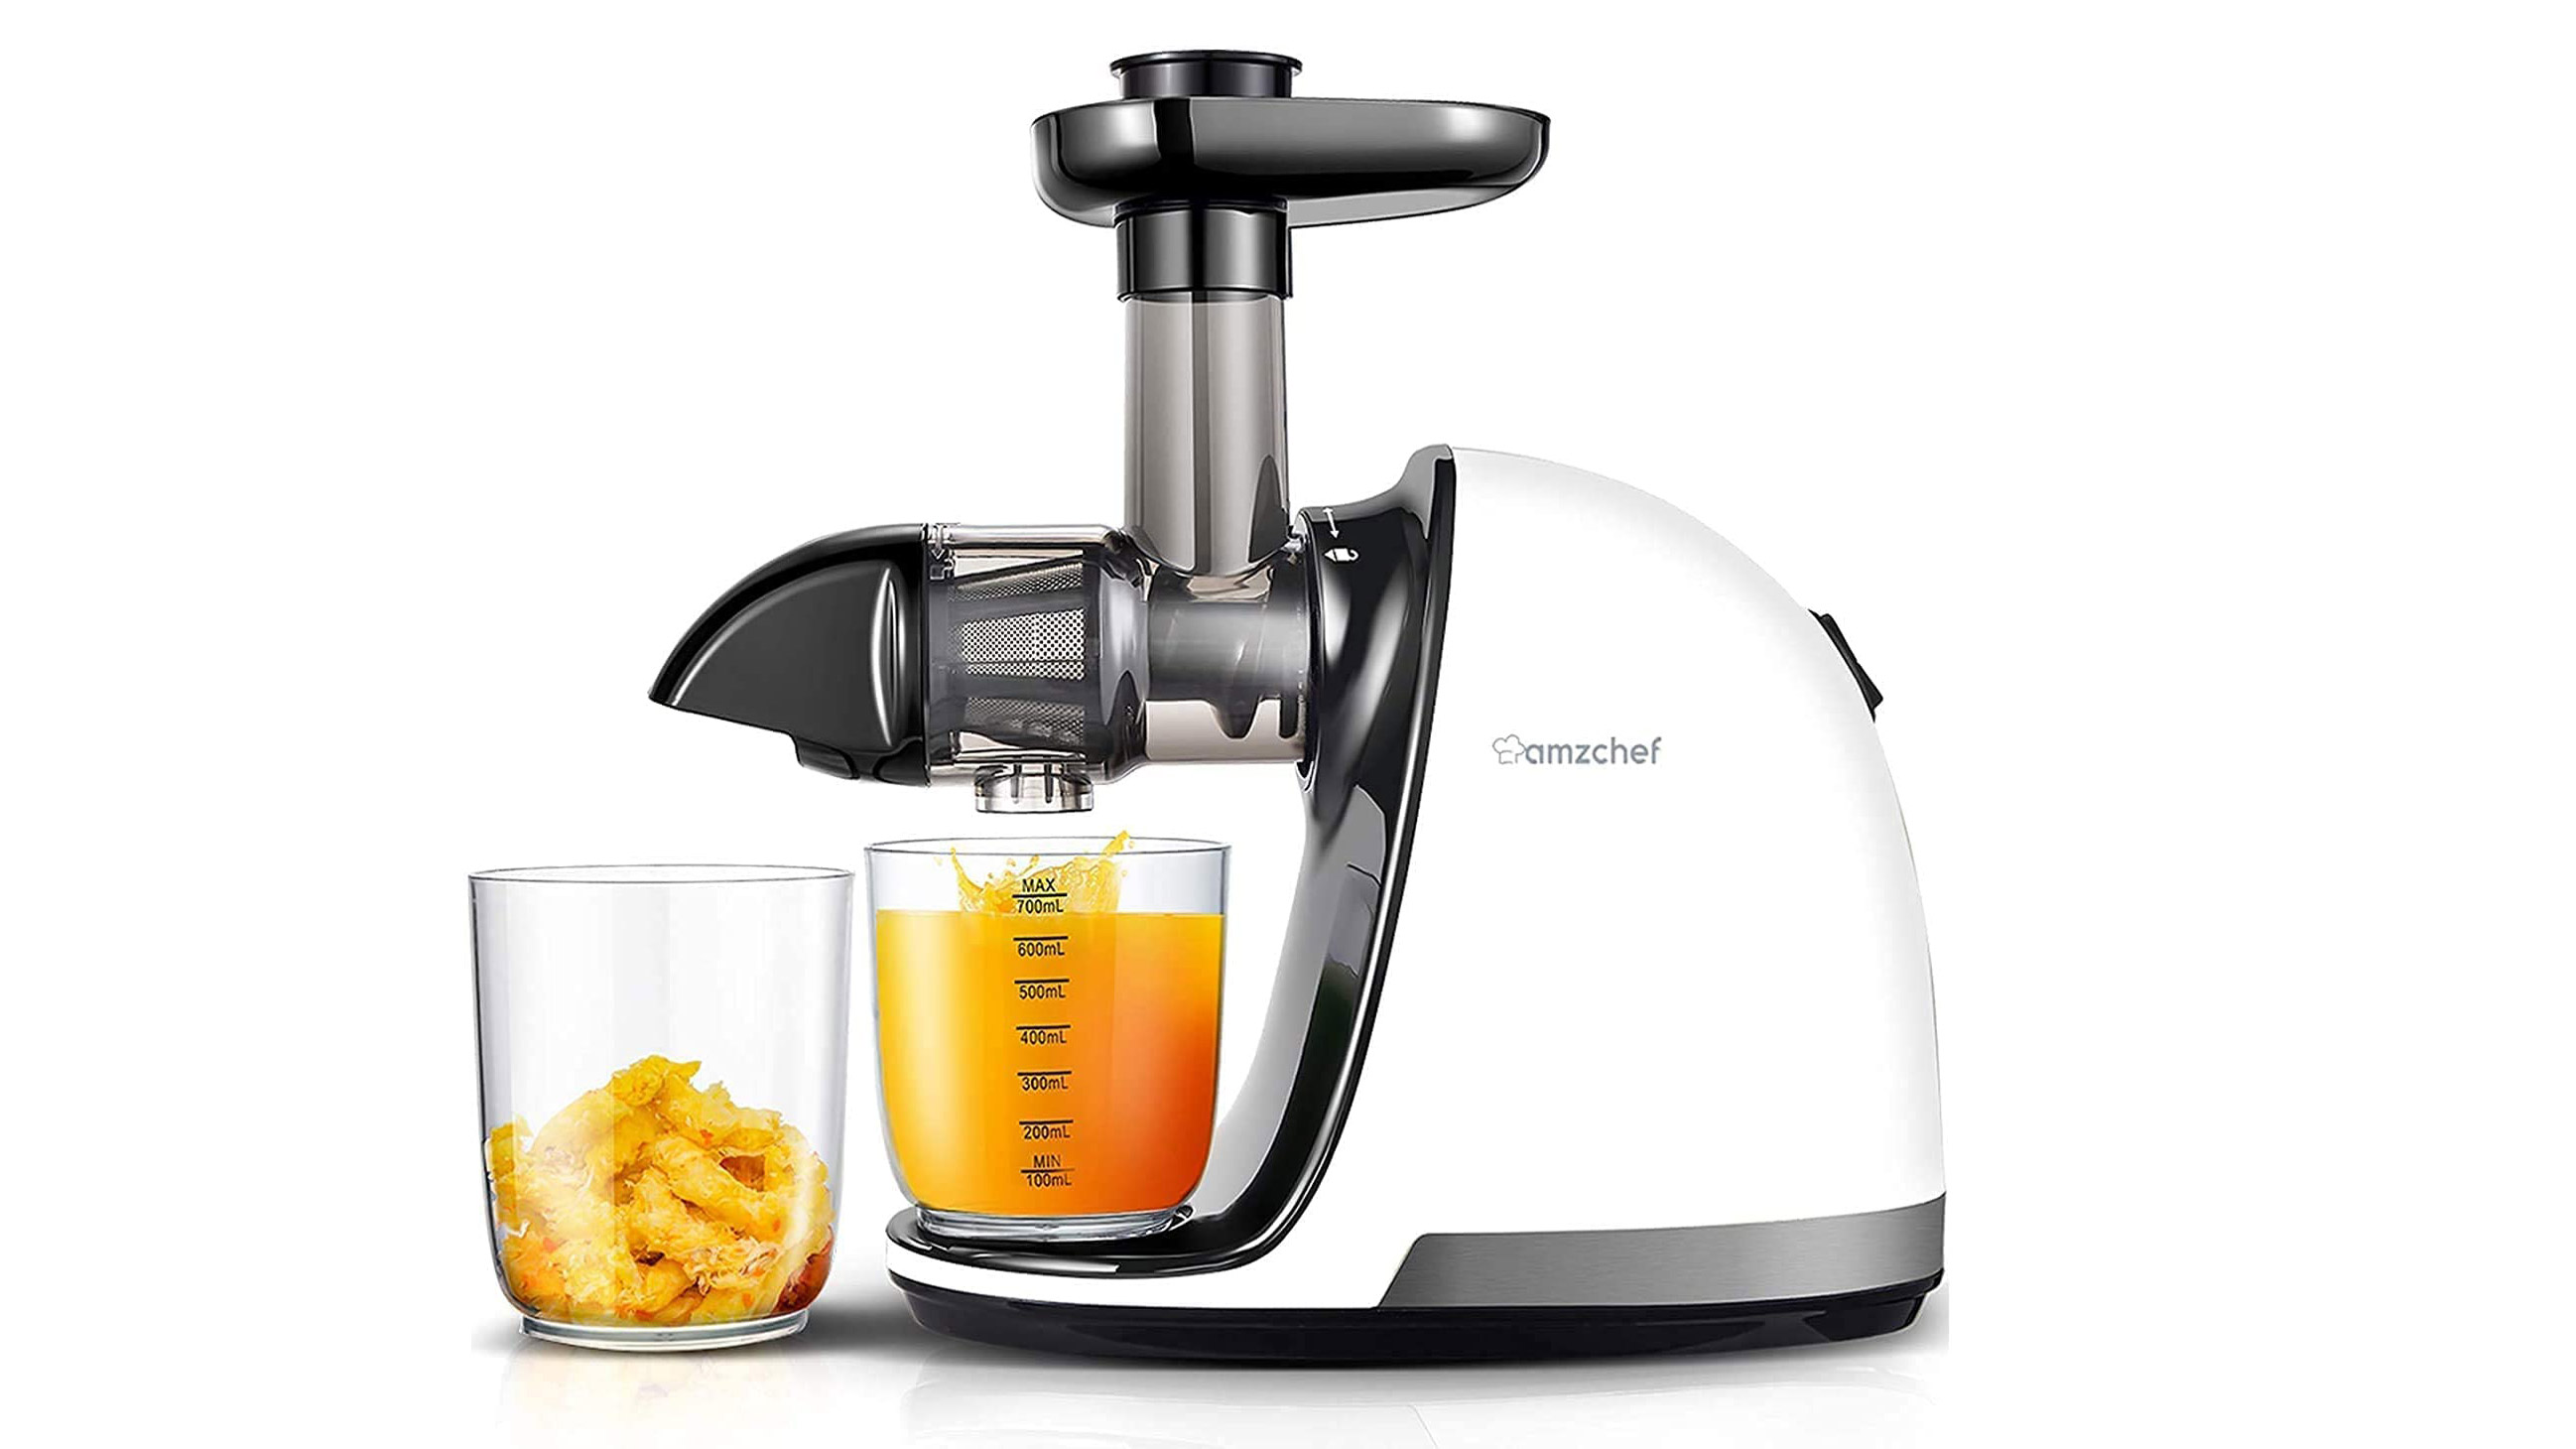 Amzchef ZM150 slow juicer on a white background with some freshly squeezed orange juice and discarded pulp